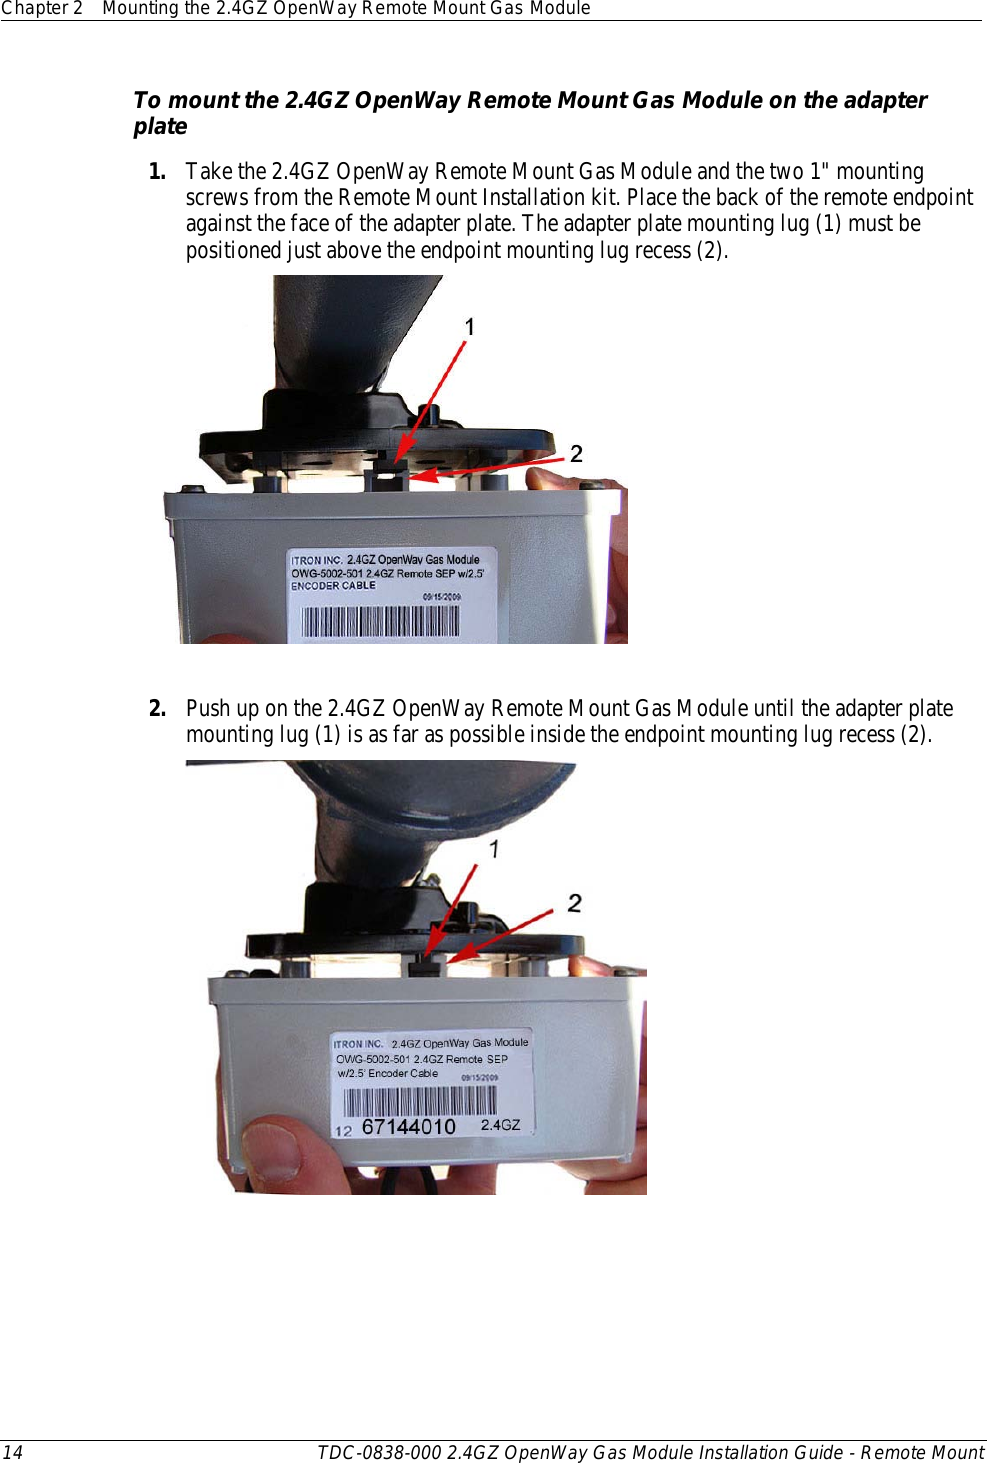 Chapter 2 Mounting the 2.4GZ OpenWay Remote Mount Gas Module  14 TDC-0838-000 2.4GZ OpenWay Gas Module Installation Guide - Remote Mount  To mount the 2.4GZ OpenWay Remote Mount Gas Module on the adapter plate 1. Take the 2.4GZ OpenWay Remote Mount Gas Module and the two 1&quot; mounting screws from the Remote Mount Installation kit. Place the back of the remote endpoint against the face of the adapter plate. The adapter plate mounting lug (1) must be positioned just above the endpoint mounting lug recess (2).   2. Push up on the 2.4GZ OpenWay Remote Mount Gas Module until the adapter plate mounting lug (1) is as far as possible inside the endpoint mounting lug recess (2).   